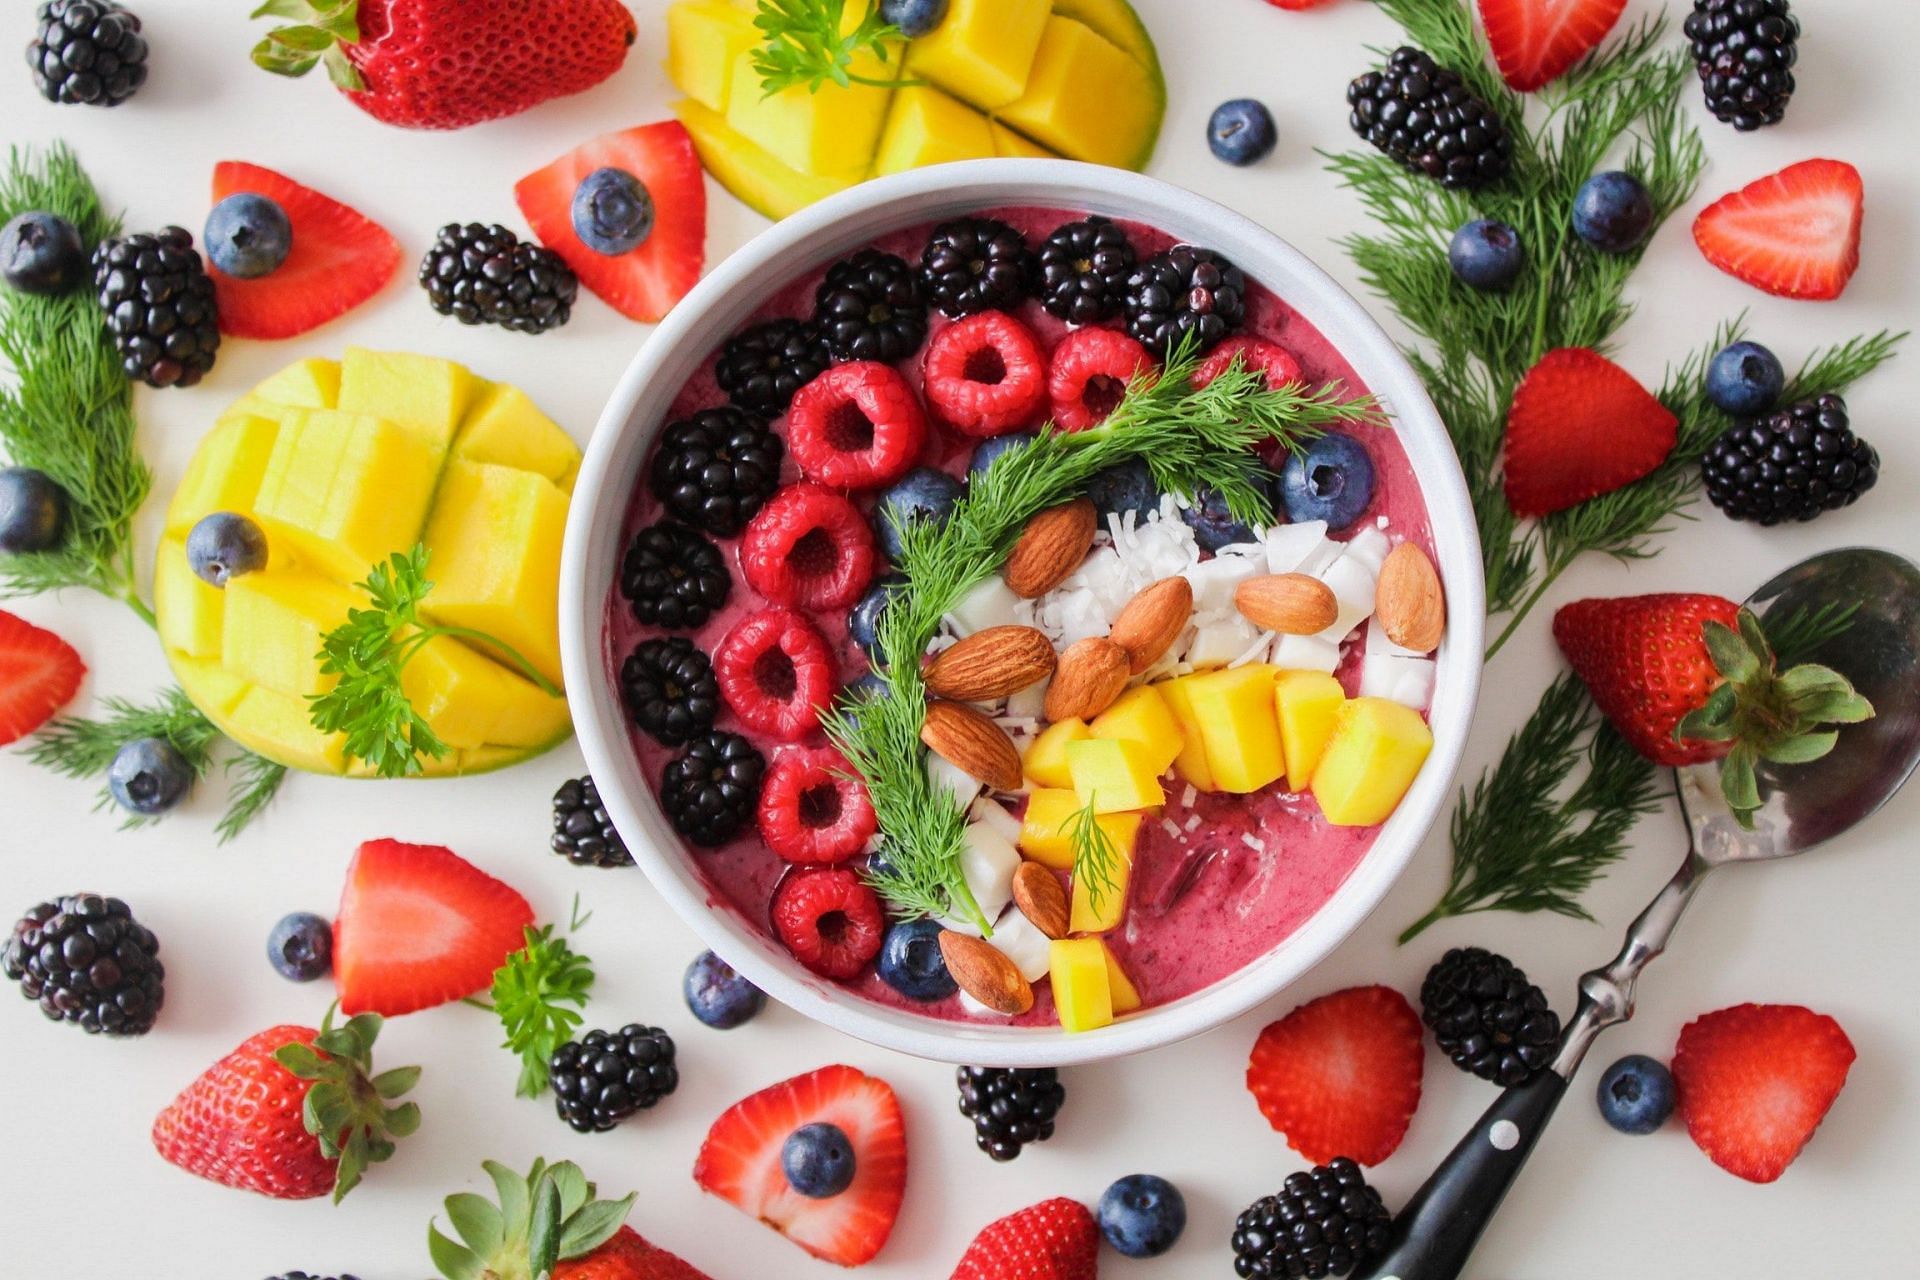 Fruits as a Natural Source of Energy and Immune-Boosting Nutrients for Cancer Patients (Image via Pexels)